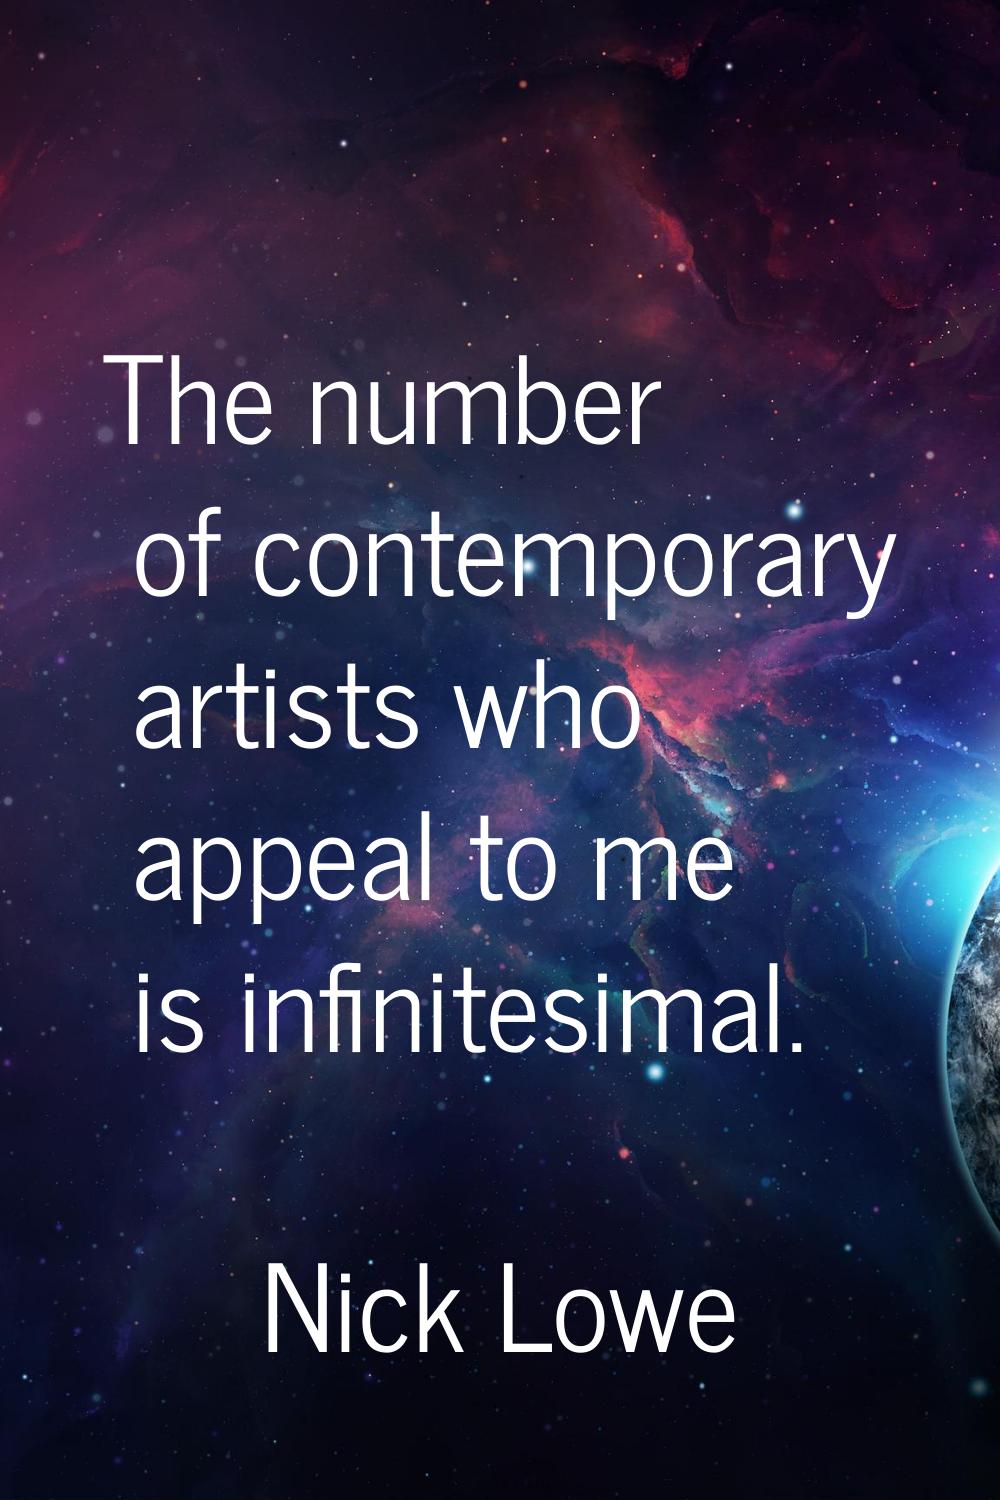 The number of contemporary artists who appeal to me is infinitesimal.